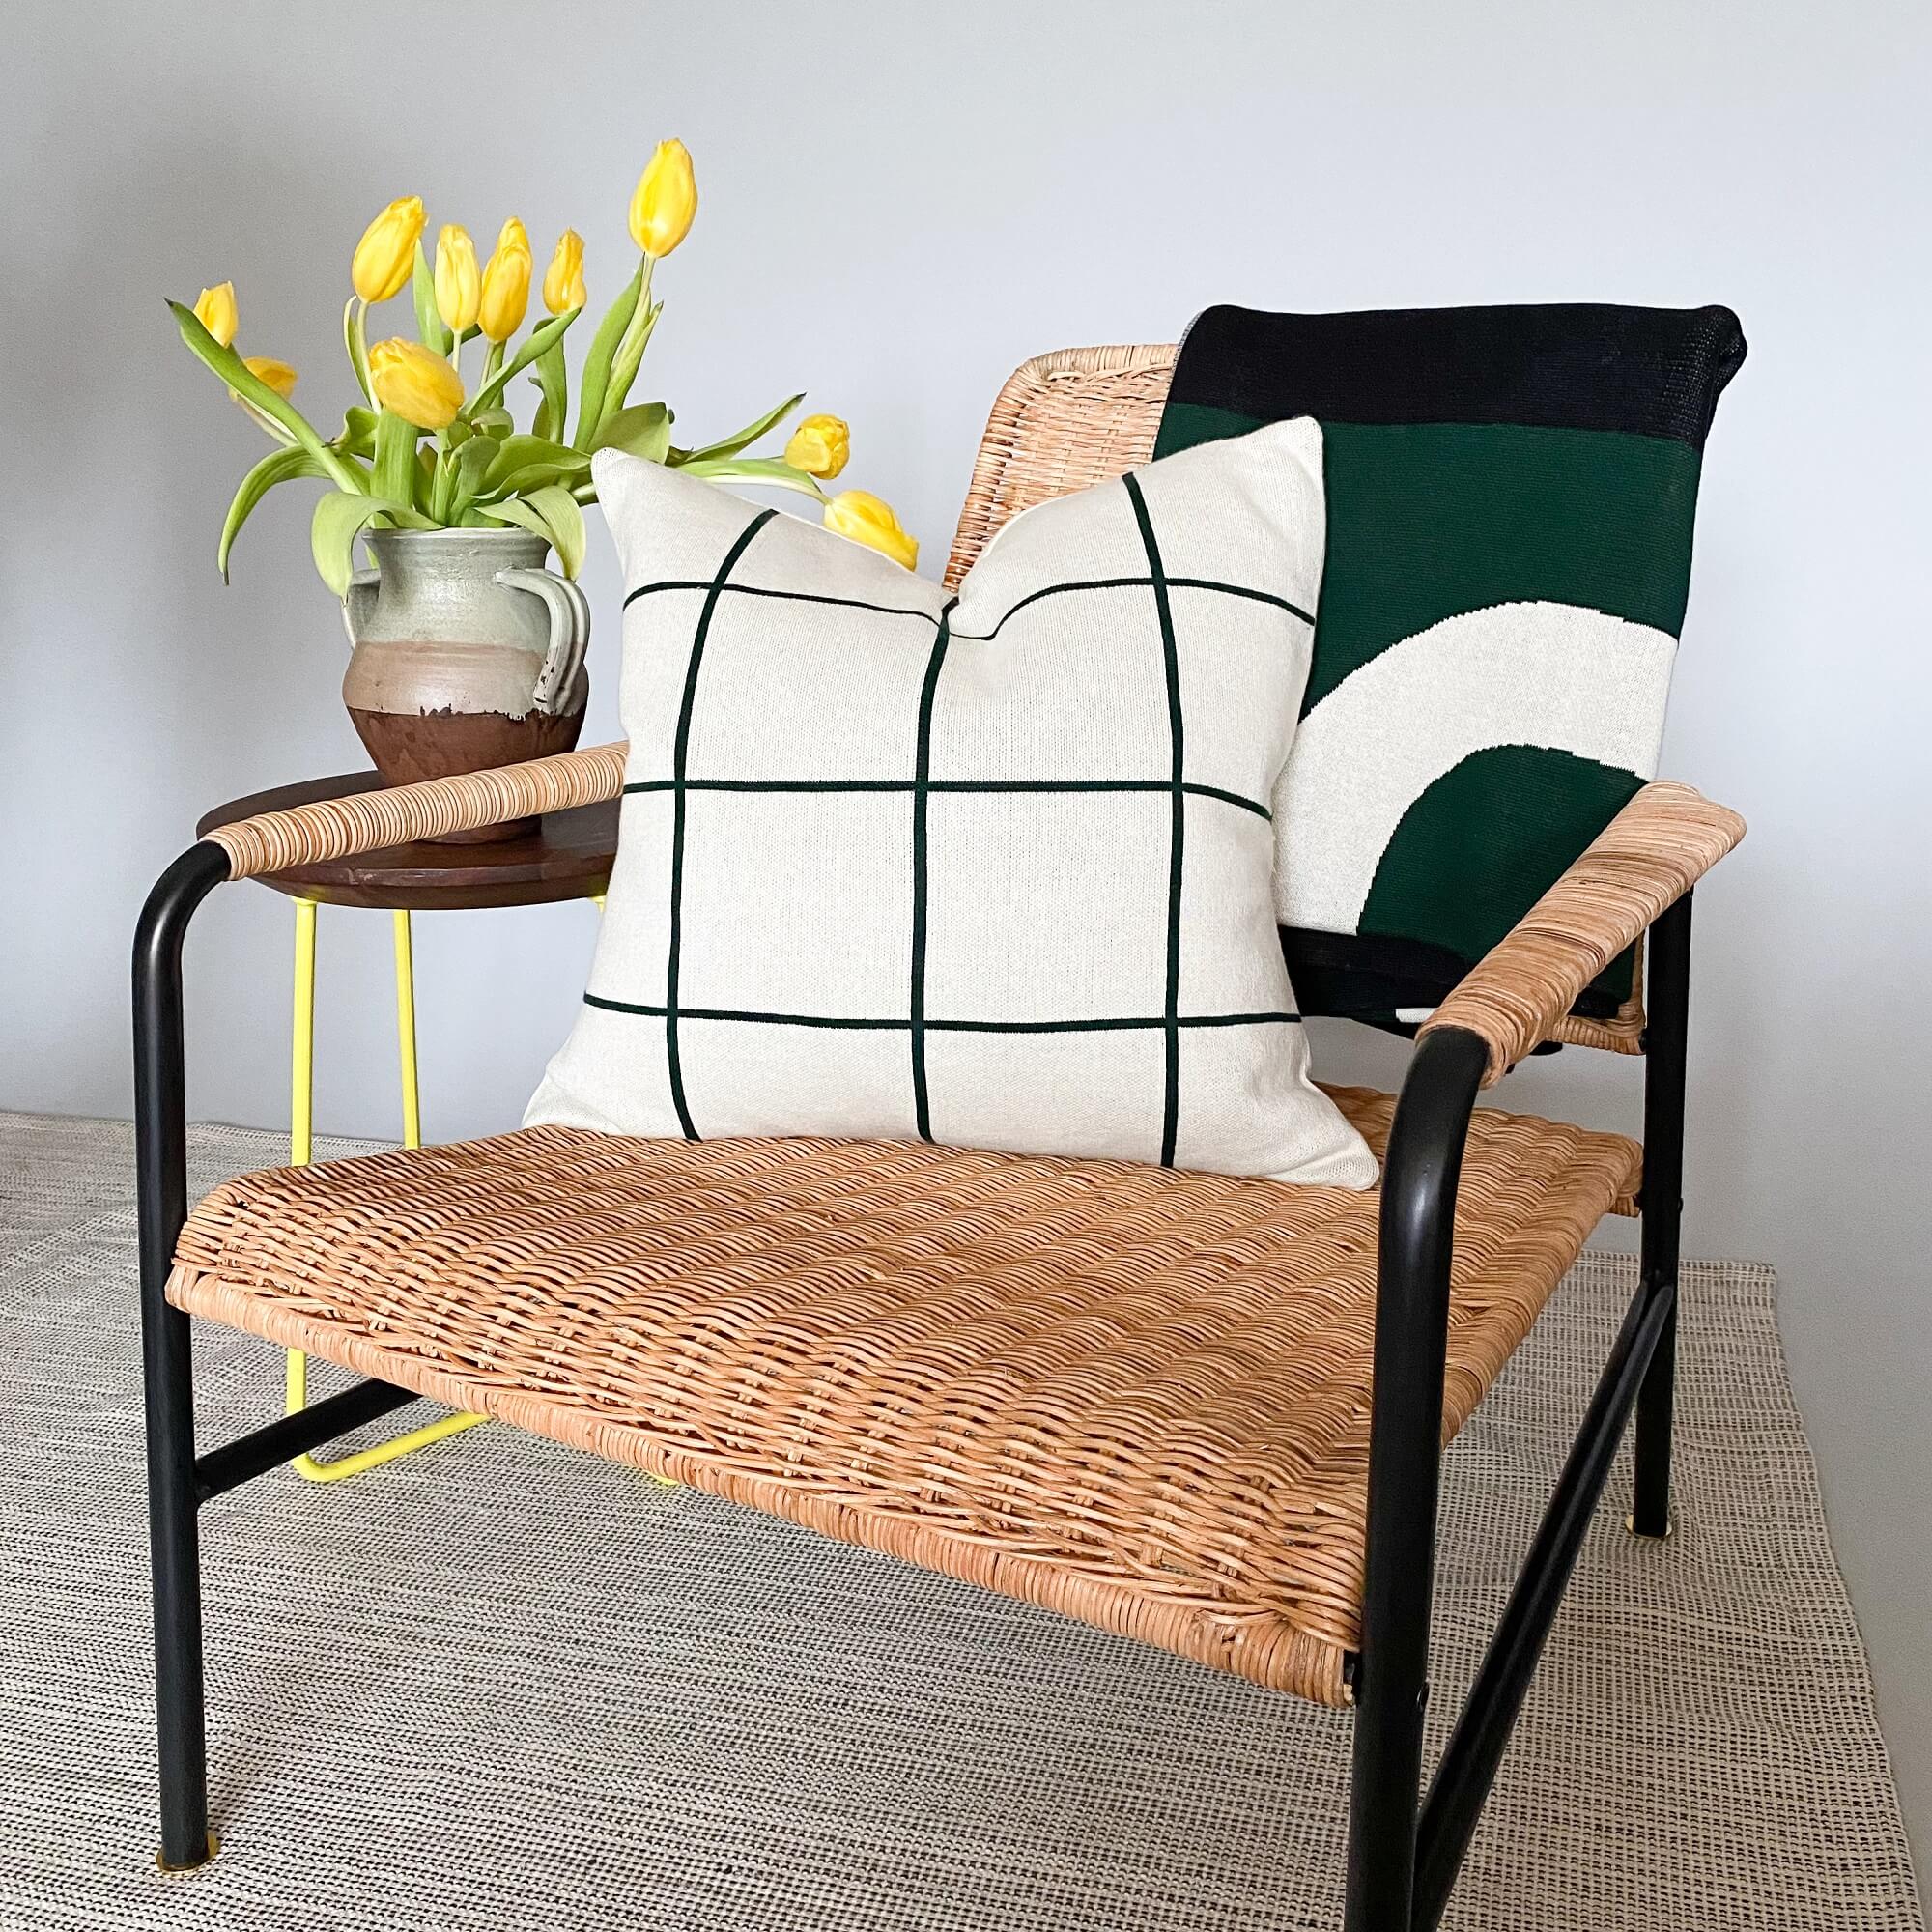 Grid Cushion | Citrus | Cotton & Duck Feather | by Sophie Home - Lifestory - Sophie Home